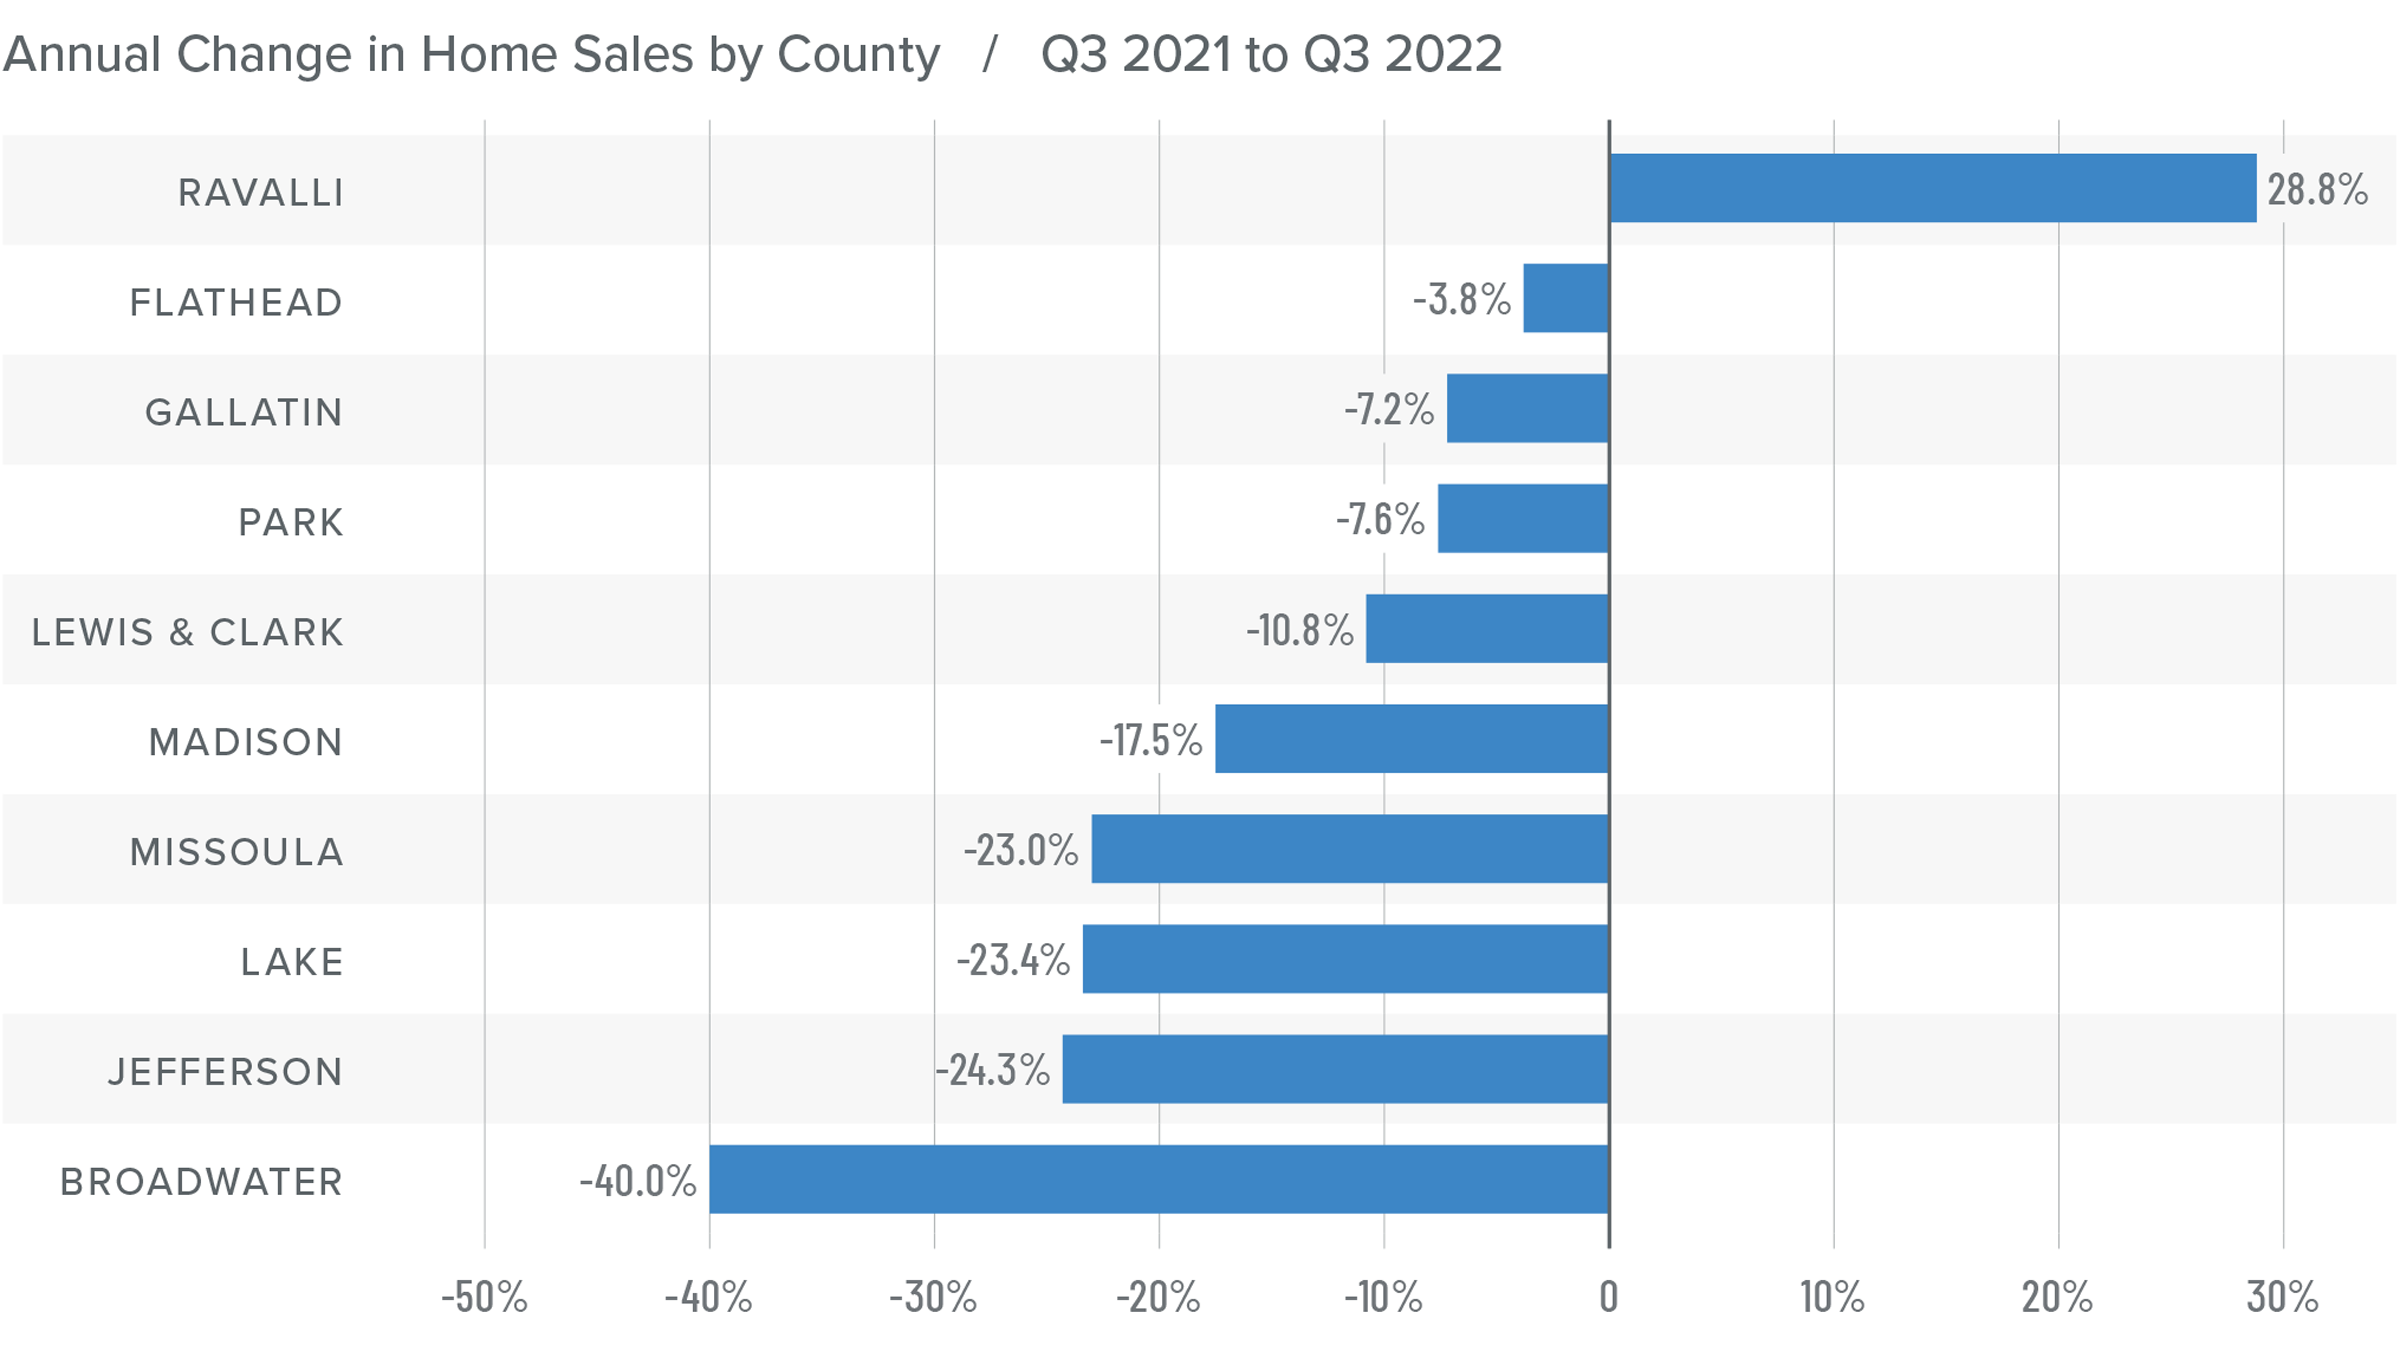 A bar graph showing the annual change in home sales for various counties in Montana from Q3 2021 to Q3 2022. All counties have a negative percentage year-over-year change except for Ravalli County at 28.8%. Flathead follows at -3.8%, then it's Gallatin at -7.2%, Park -7.6%, Lewis & Clark -10.8%, Madison -17.5%, Missoula -23%, Lake -23.4%, Jefferson -24.3%, and Broadwater at -40%.